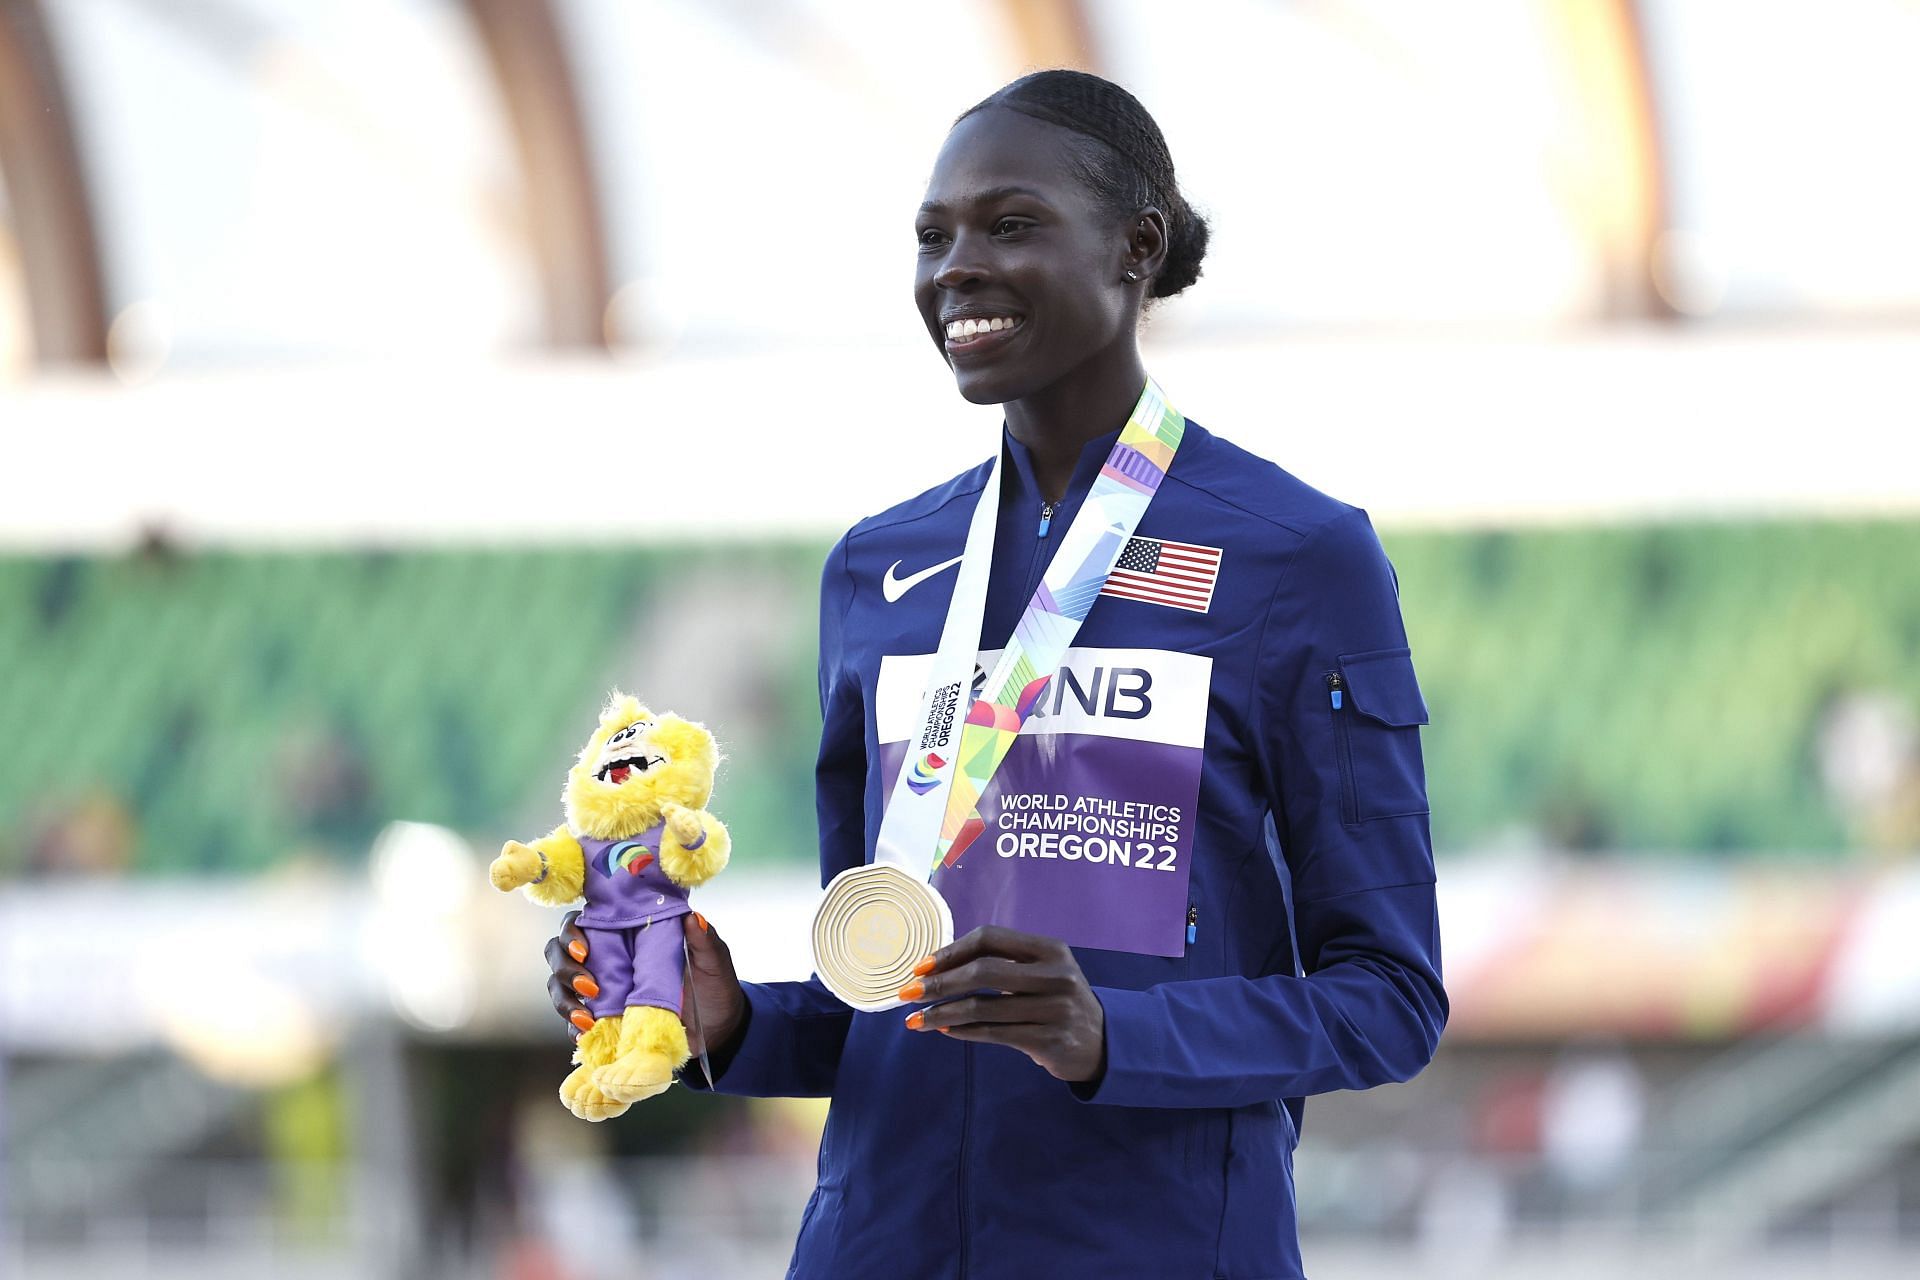 Gold medalist Athing Mu of Team United States poses during the medal ceremony for the Women&#039;s 800m at the 2022 World Athletics Championships at Hayward Field in Eugene, Oregon.